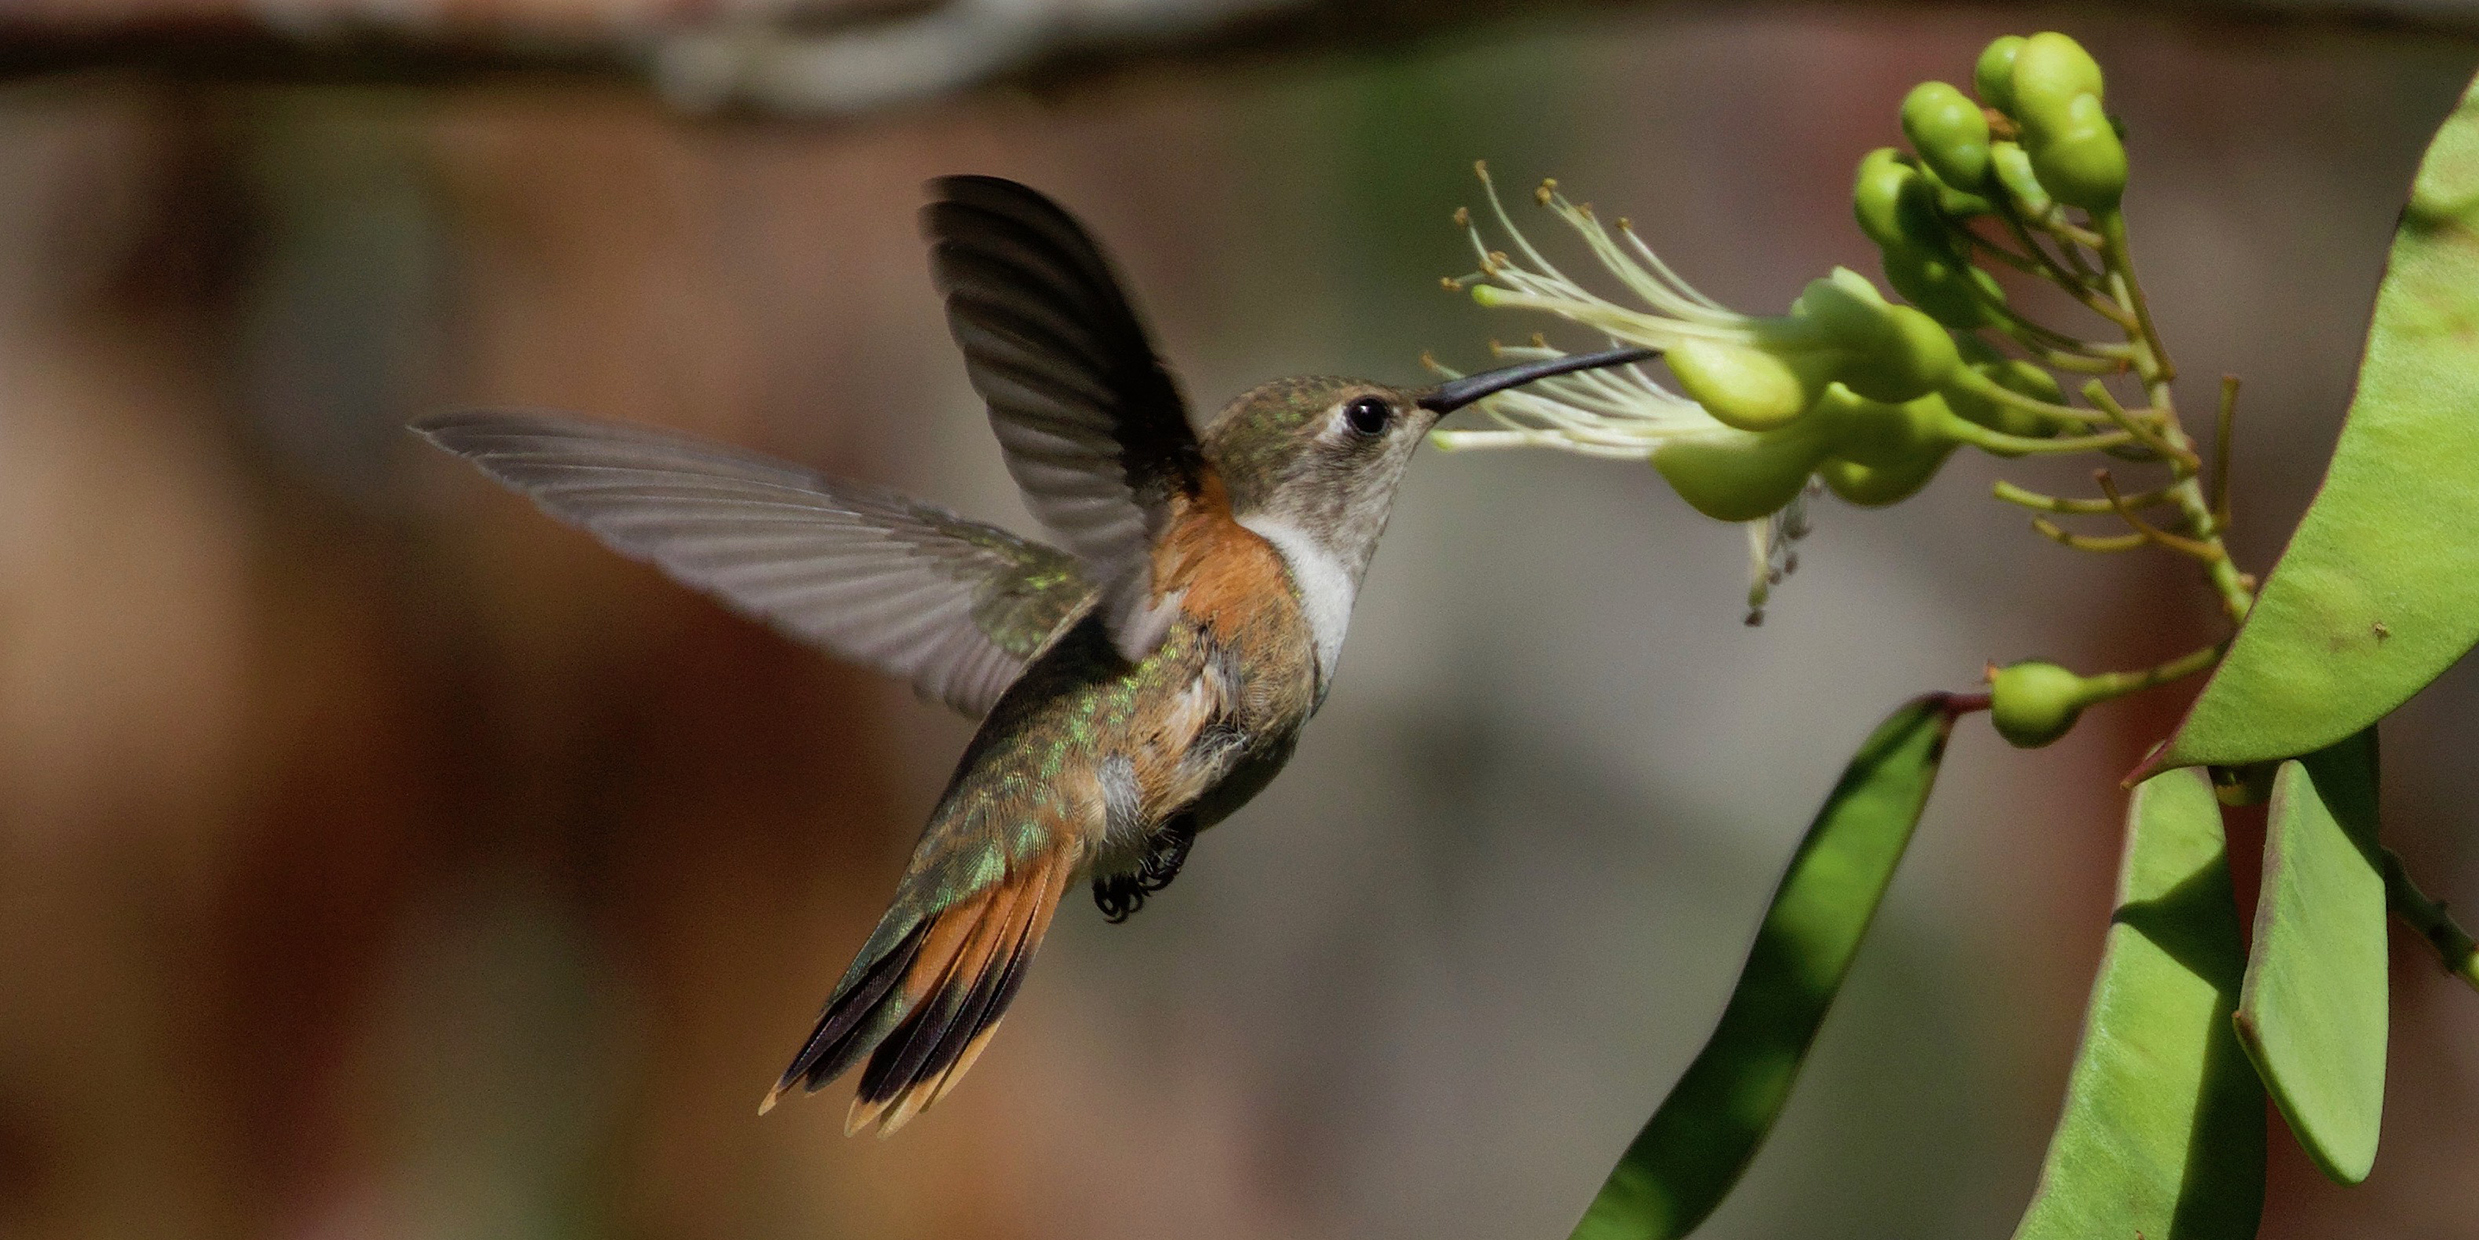 Image of a hummingbird hovering and feeding from a flower